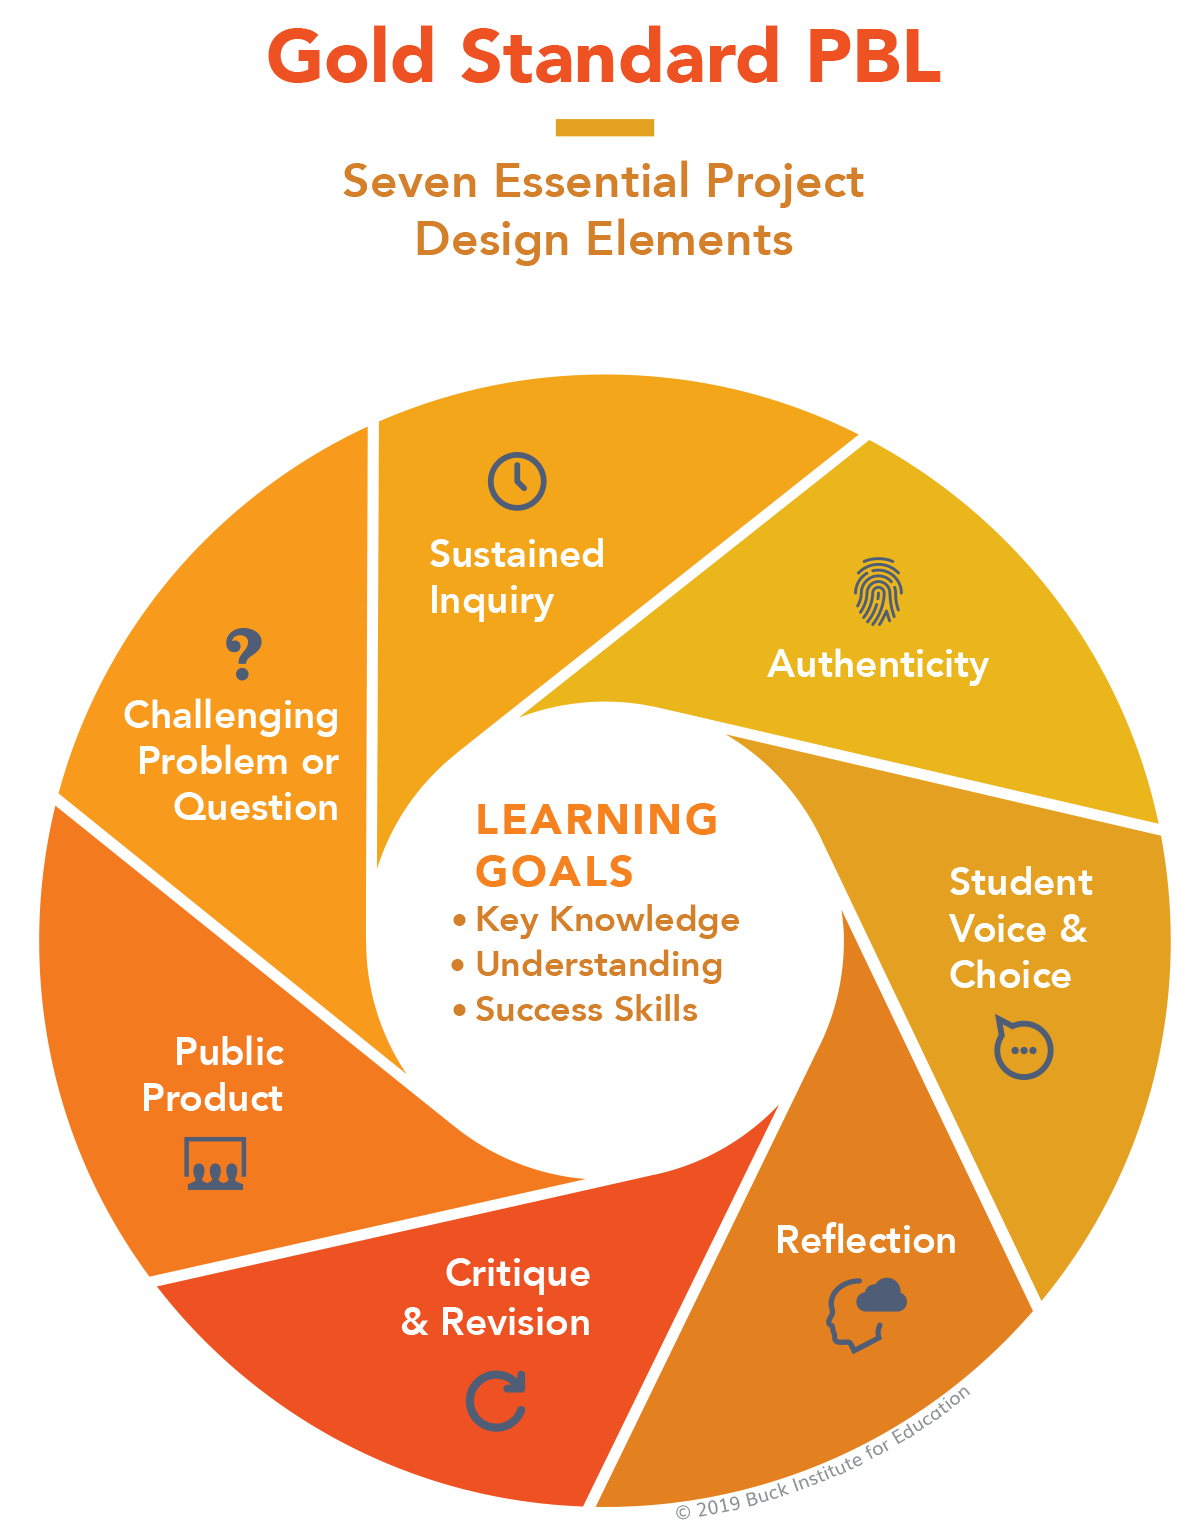 Gold Standard PBL - Seven Essential Project Design Elements - At the Center Learning Goals bulleted key knowledge, Understanding, Success Skills Around the outside 7 elements - Challenging Problem or Question - Sustained Inquiry - Authenticity - Student Voice and Choice - Reflection - Critique and Revision - Public Product - 